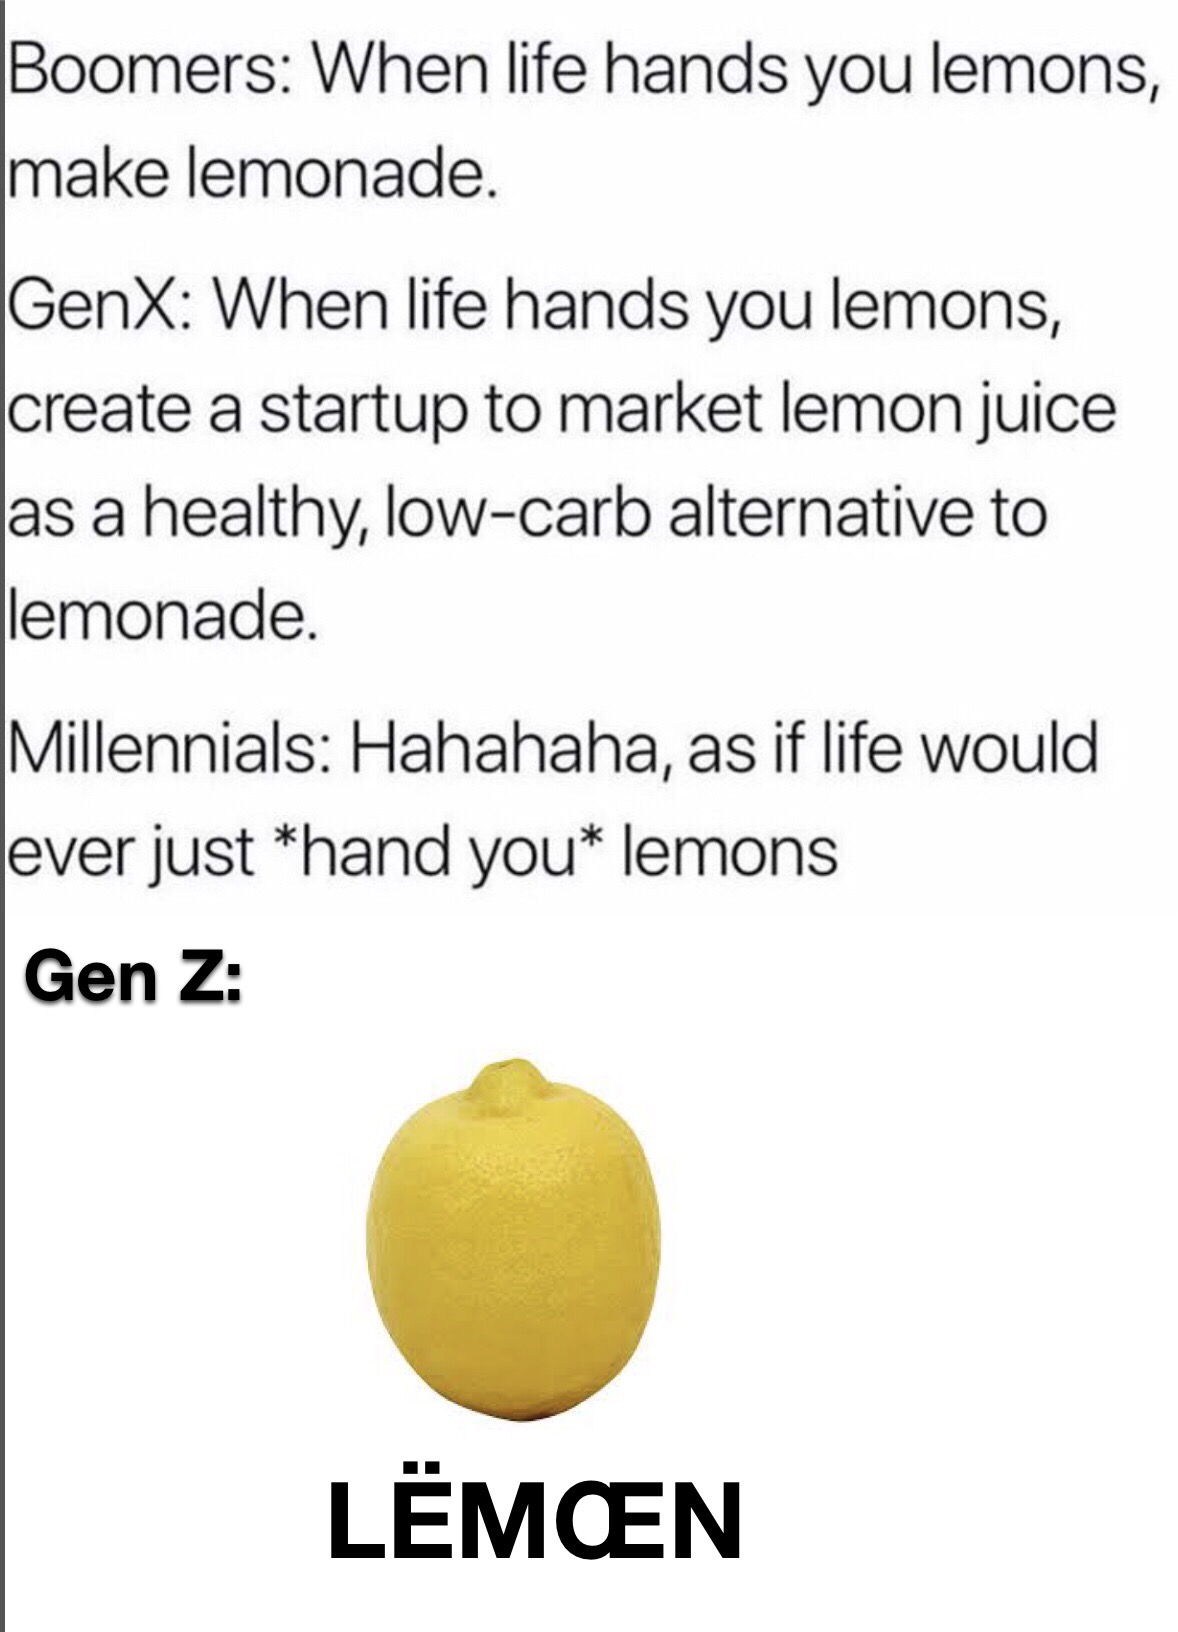 funny memes - Boomers When life hands you lemons, make lemonade. GenX When life hands you lemons, create a startup to market lemon juice as a healthy, low carb alternative to lemonade. Millennials Hahahaha, as if life would ever just hand you lemons Gen Z